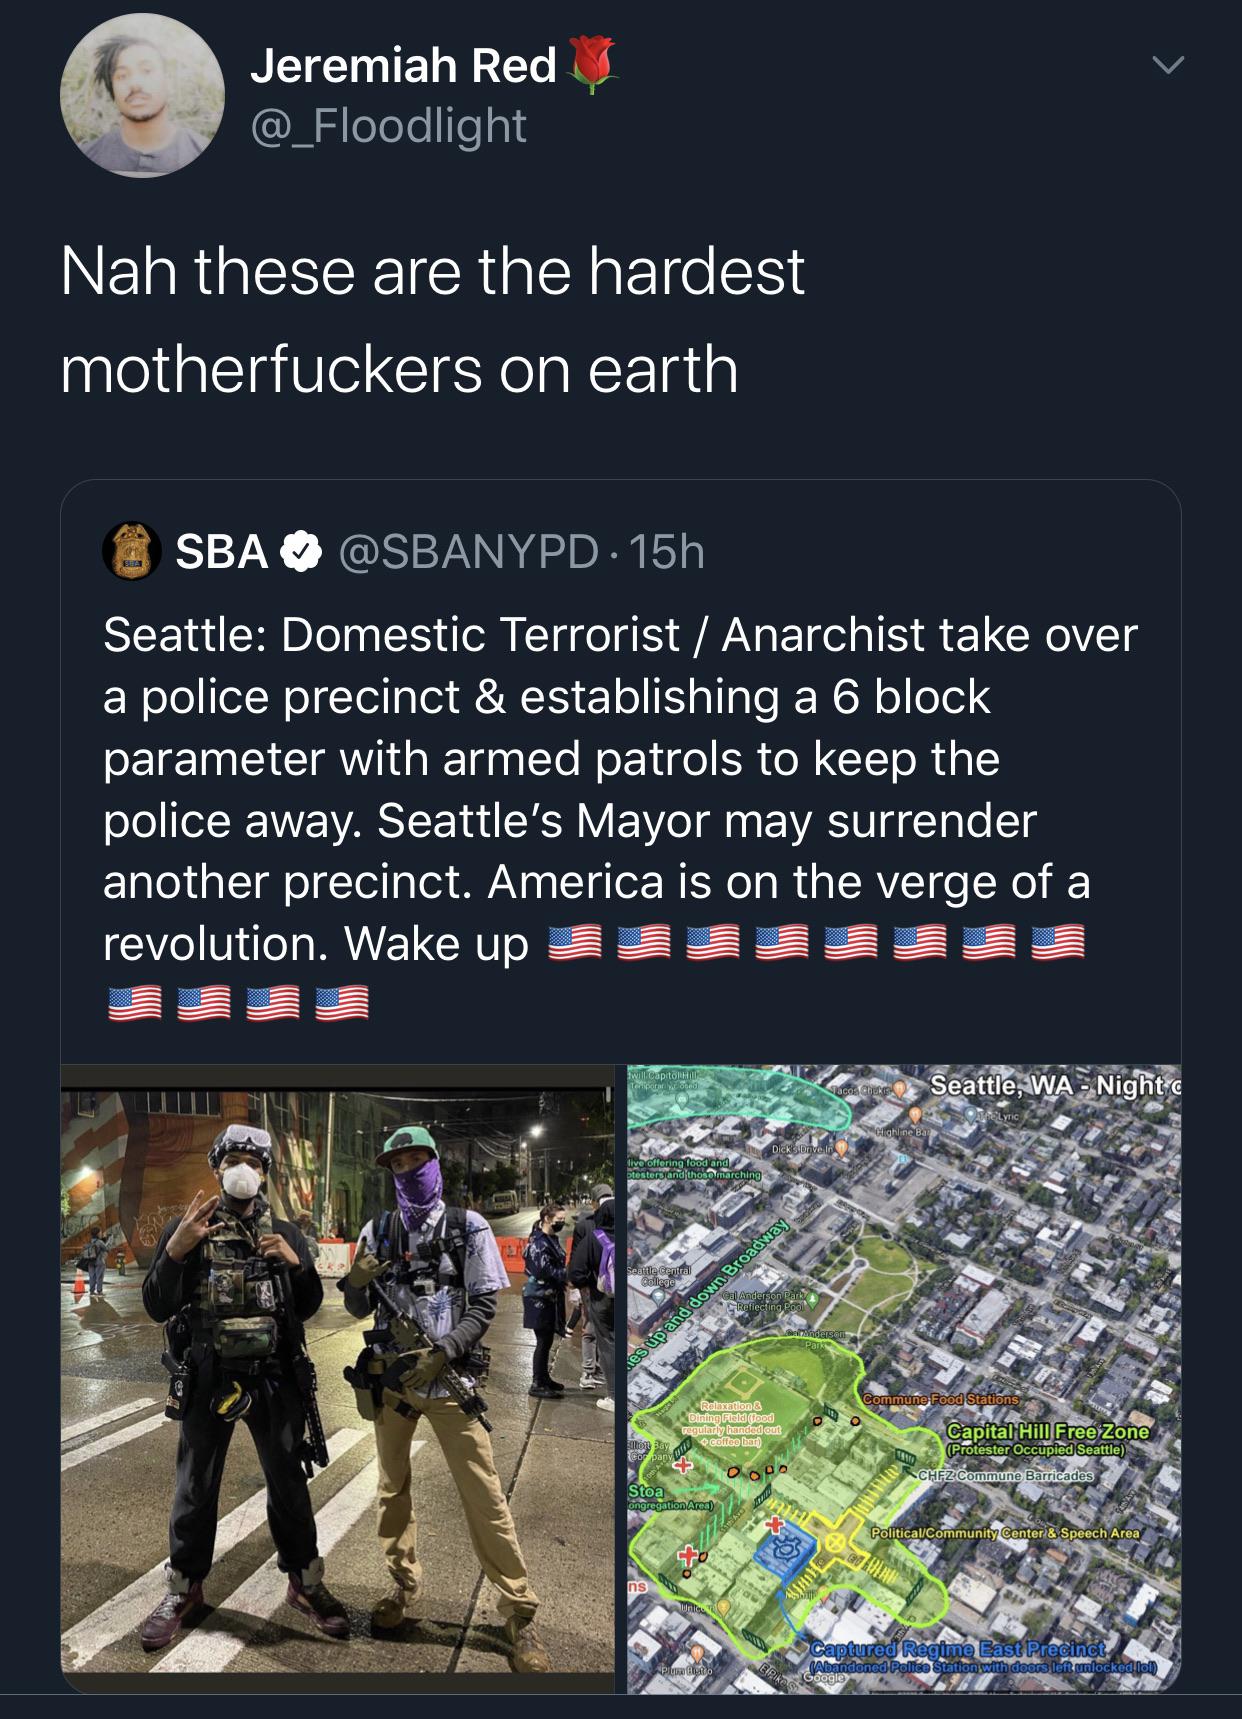 Tweets, CHAZ, June, BLM, America, Tuesday Black Twitter Memes Tweets, CHAZ, June, BLM, America, Tuesday text: e Jeremiah Red @_Floodlight Nah these are the hardest motherfuckers on earth SBA e @SBANYPD • 15h Seattle: Domestic Terrorist / Anarchist take over a police precinct & establishing a 6 block parameter with armed patrols to keep the police away. Seattle's Mayor may surrender another precinct. America is on the verge of a revolution. Wake up CZpitäliHill FreéZone IProtöStéF Occüpied Seattle's, CHfZ'Connnune Polltn-zaI/Community Center